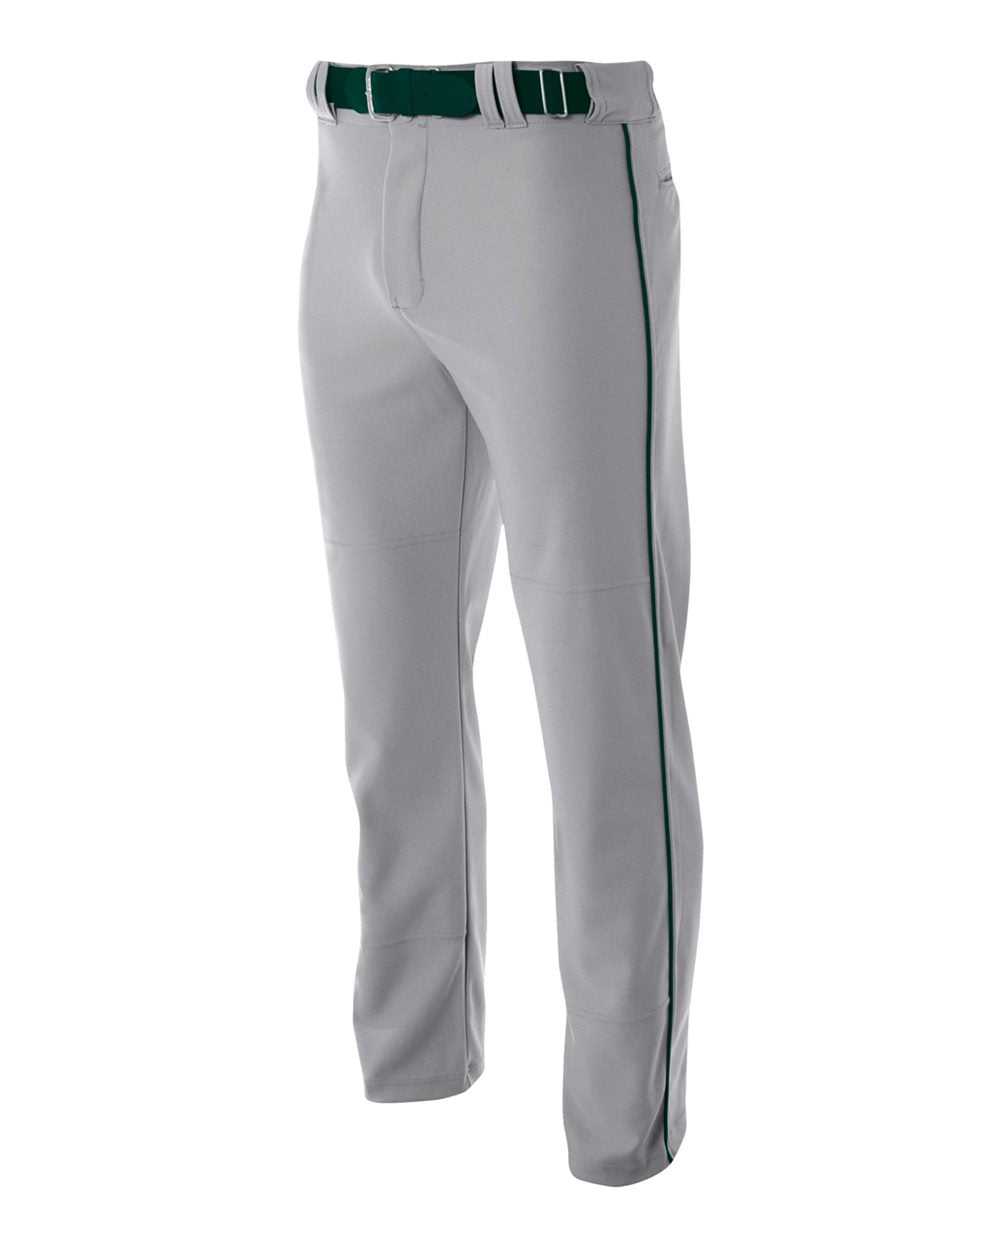 A4 NB6162 Youth Pro Style Open Bottom Baggy Cut Baseball Pant - Gray Forest - HIT a Double